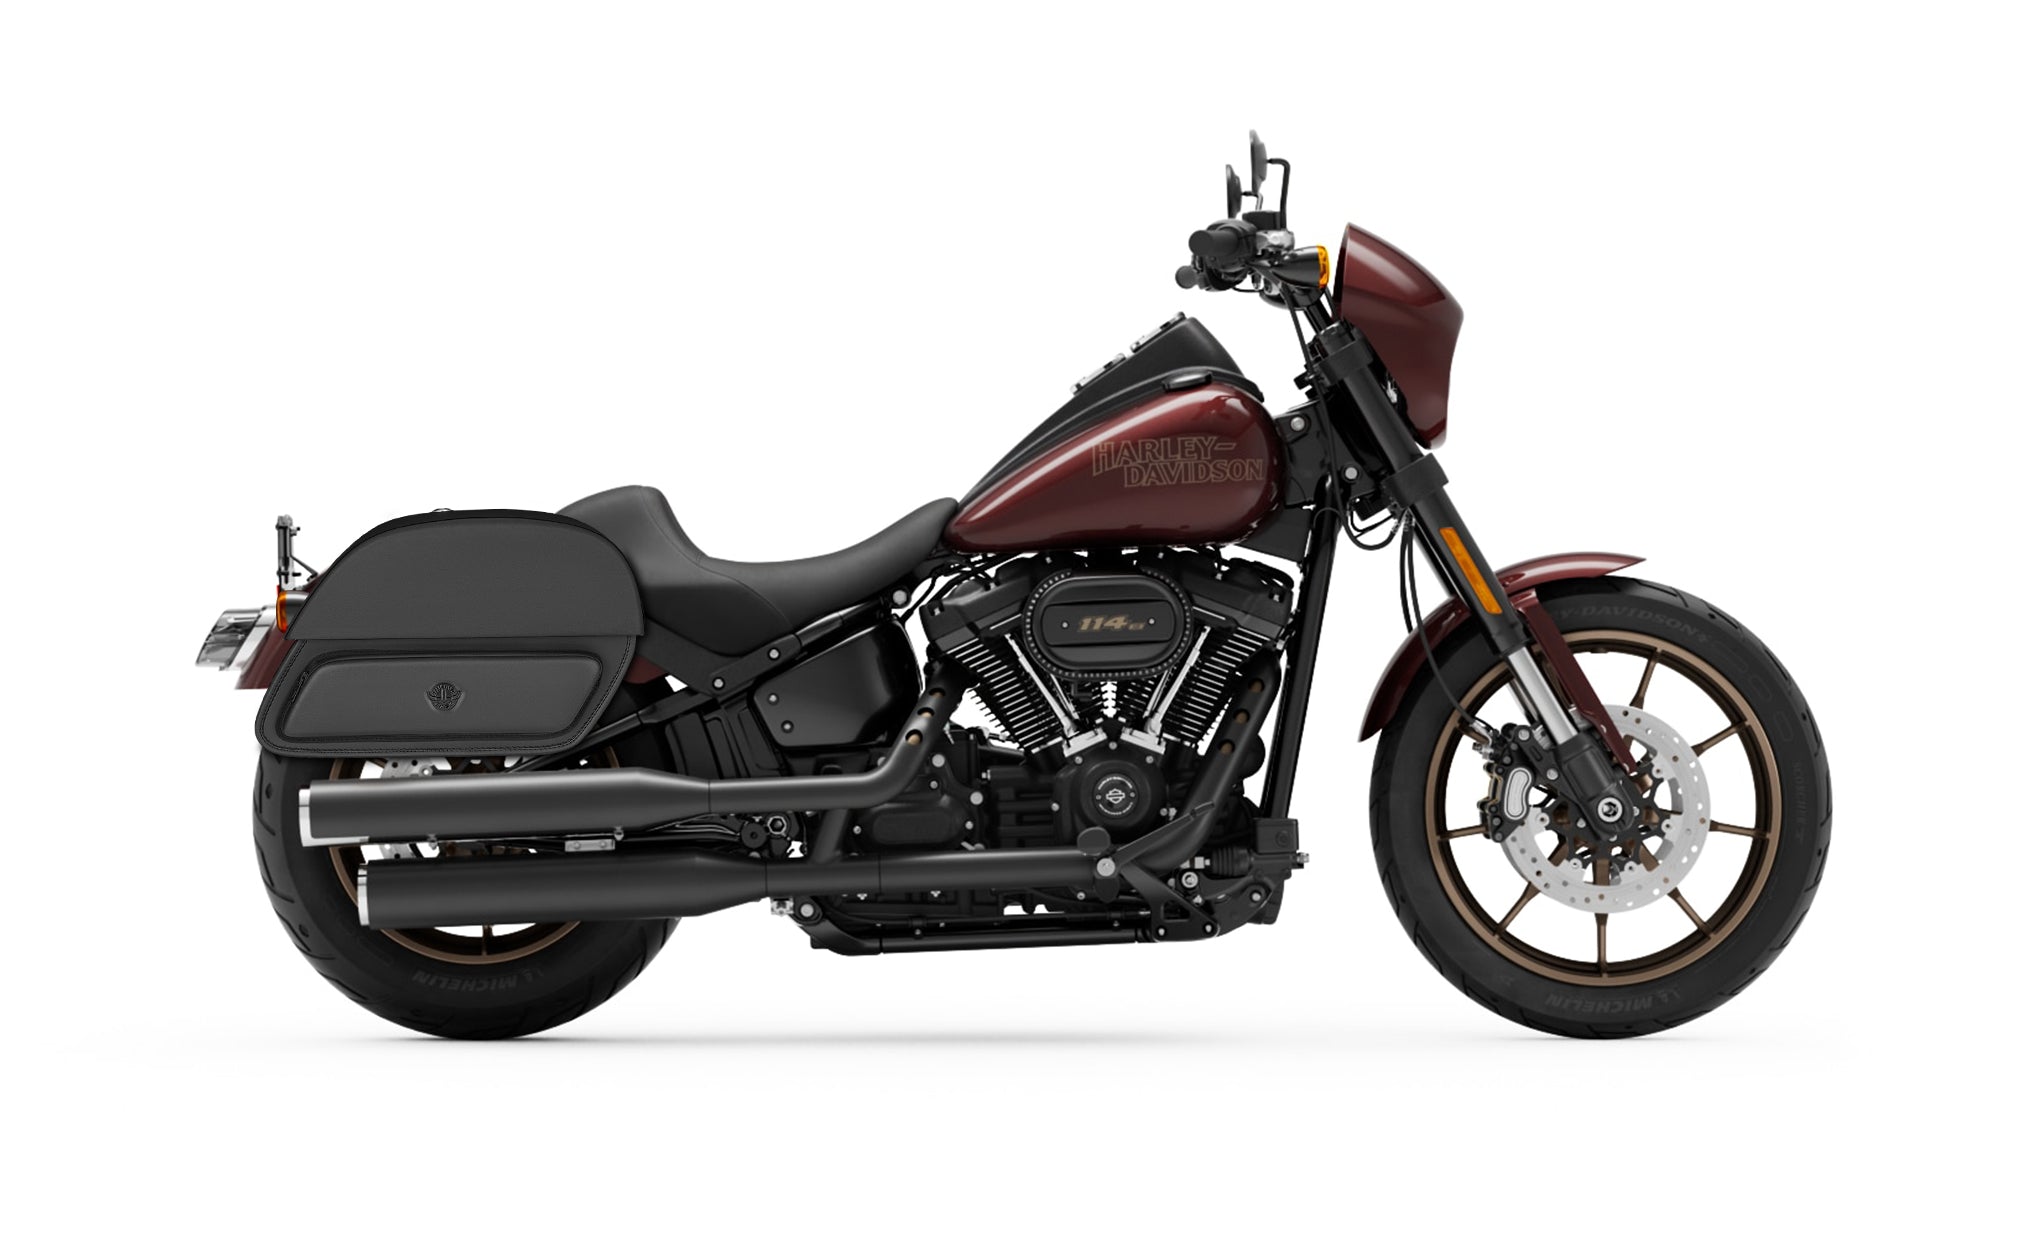 28L - Pantheon Medium Motorcycle Saddlebags for Harley Softail Low Rider S FXLRS on Bike Photo @expand